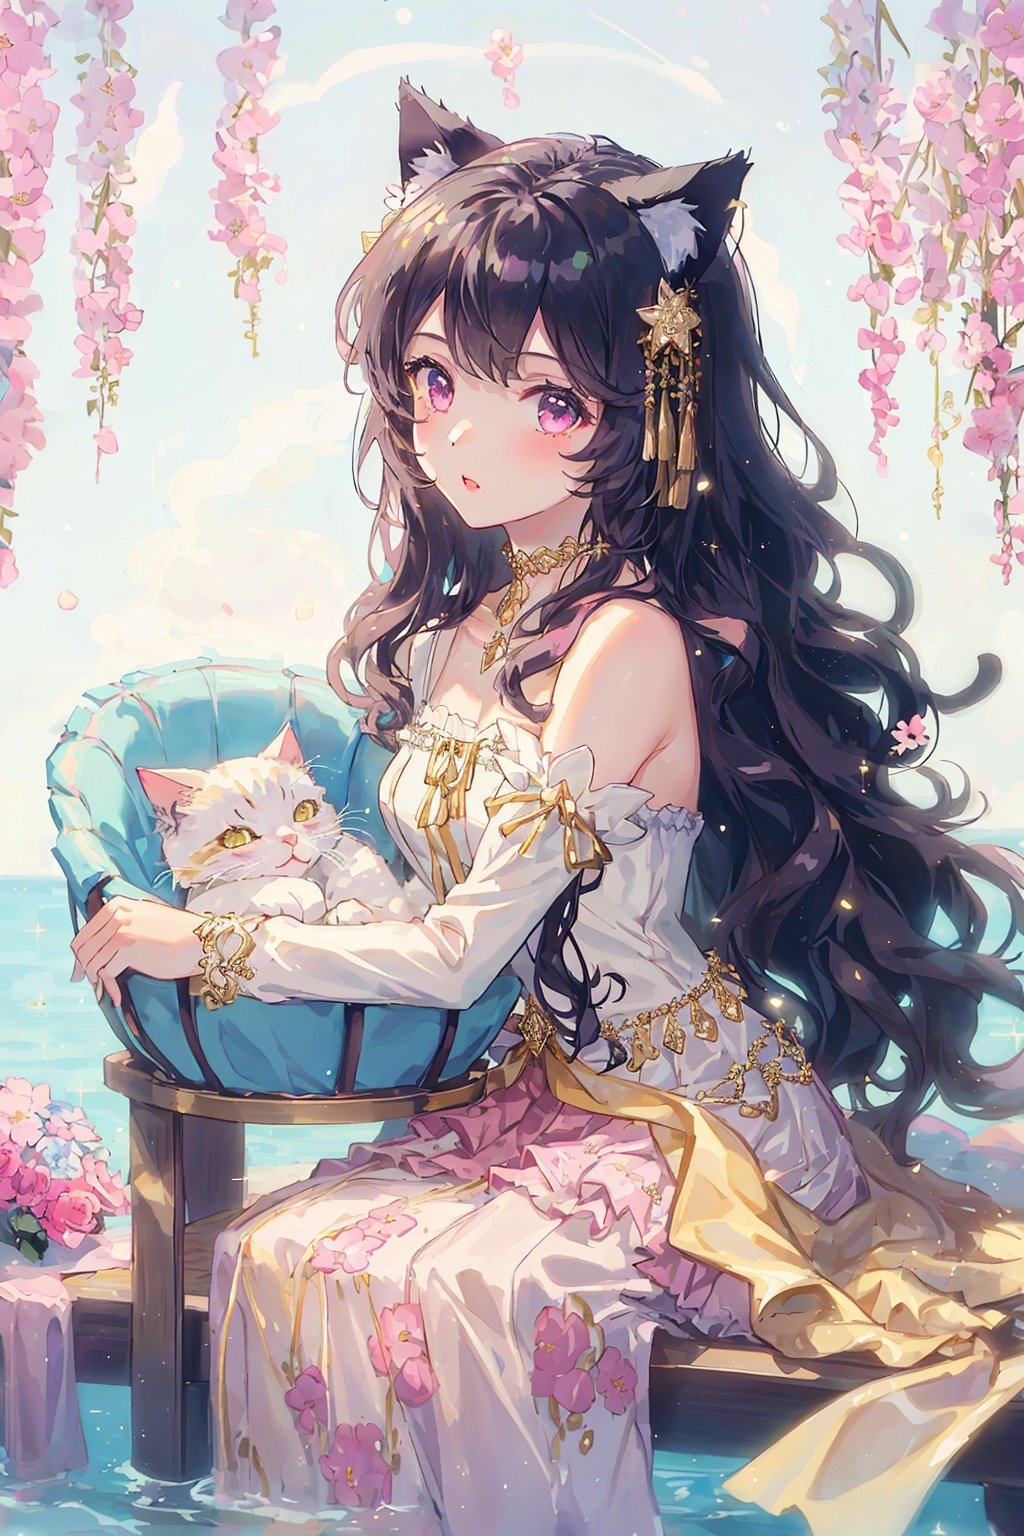 1girl, wearing a white tulle skirt with golden tassels, exquisite face, gold jewelry, gold decoration, black wavy hair, a pair of cat ears that can control water around her, dazzling and colorful, extremely cute, sitting in a cradle full of flowers,Pink Mecha